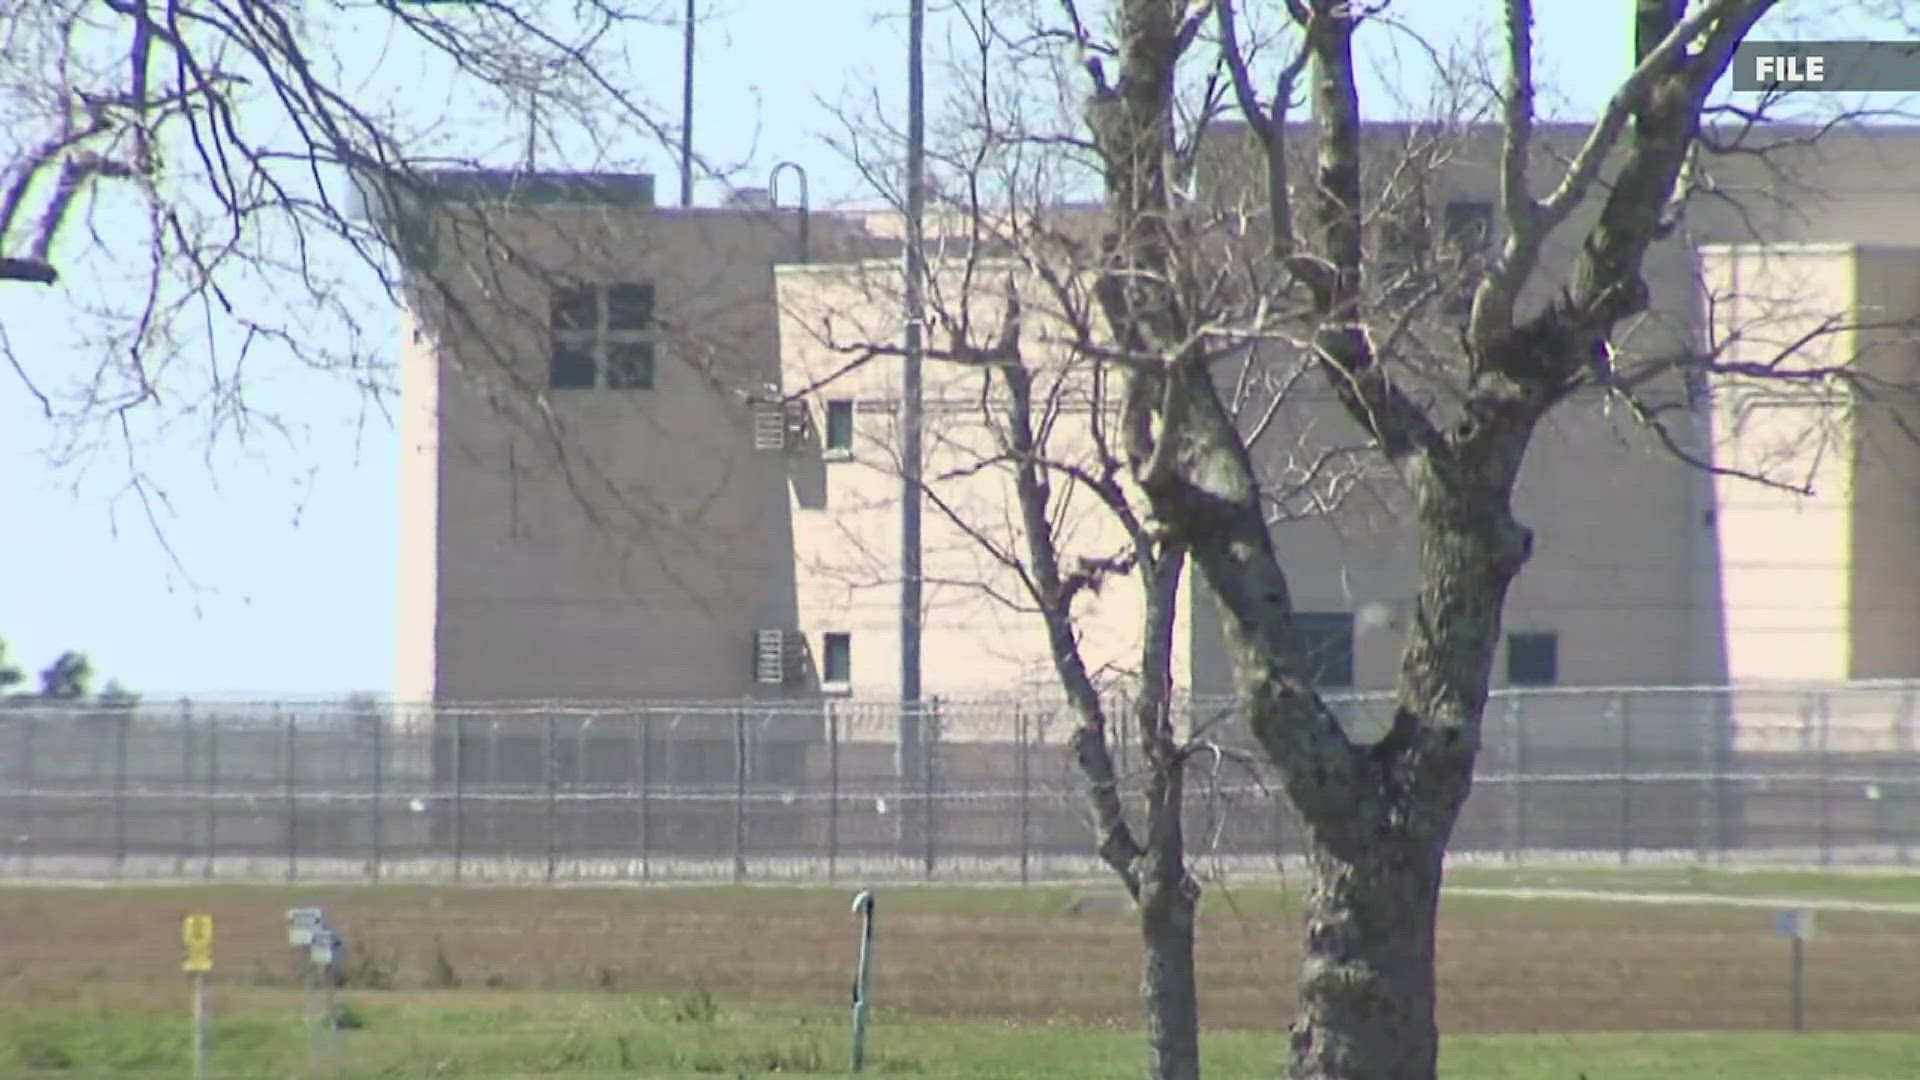 The latest inmate death happened on Monday in Beaumont's Stiles Unit.